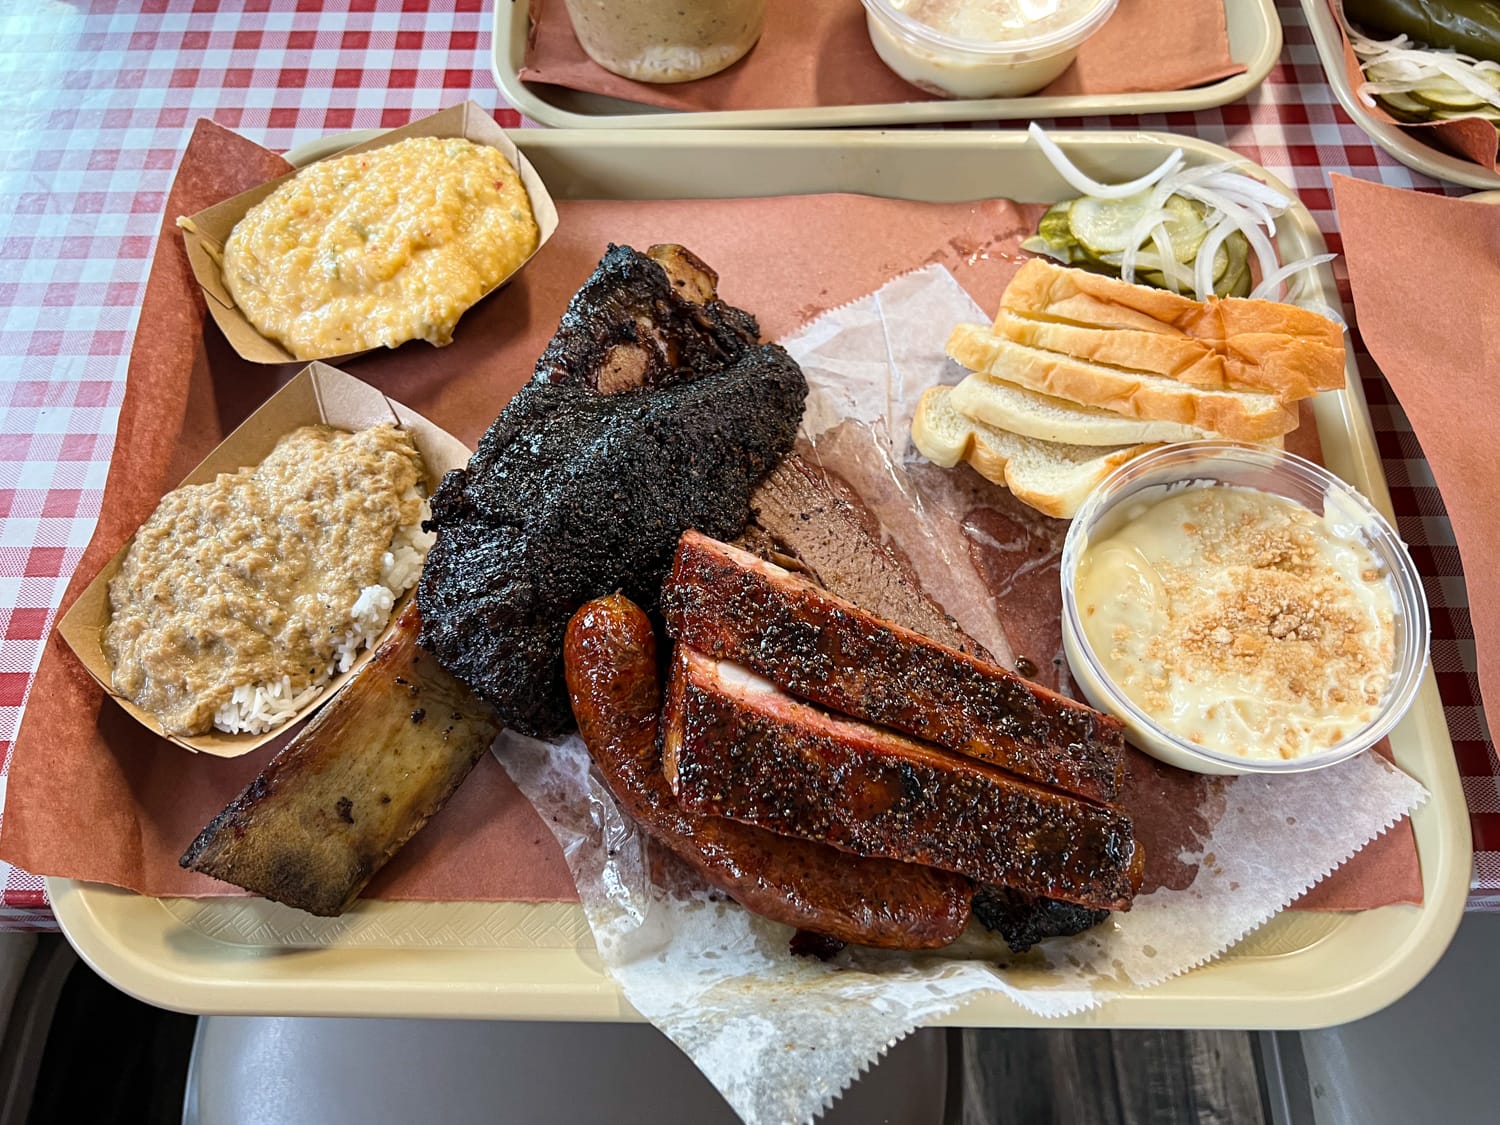 Brisket, beef and pork ribs, and sausage at Goldee's Barbecue in Fort Worth, TX